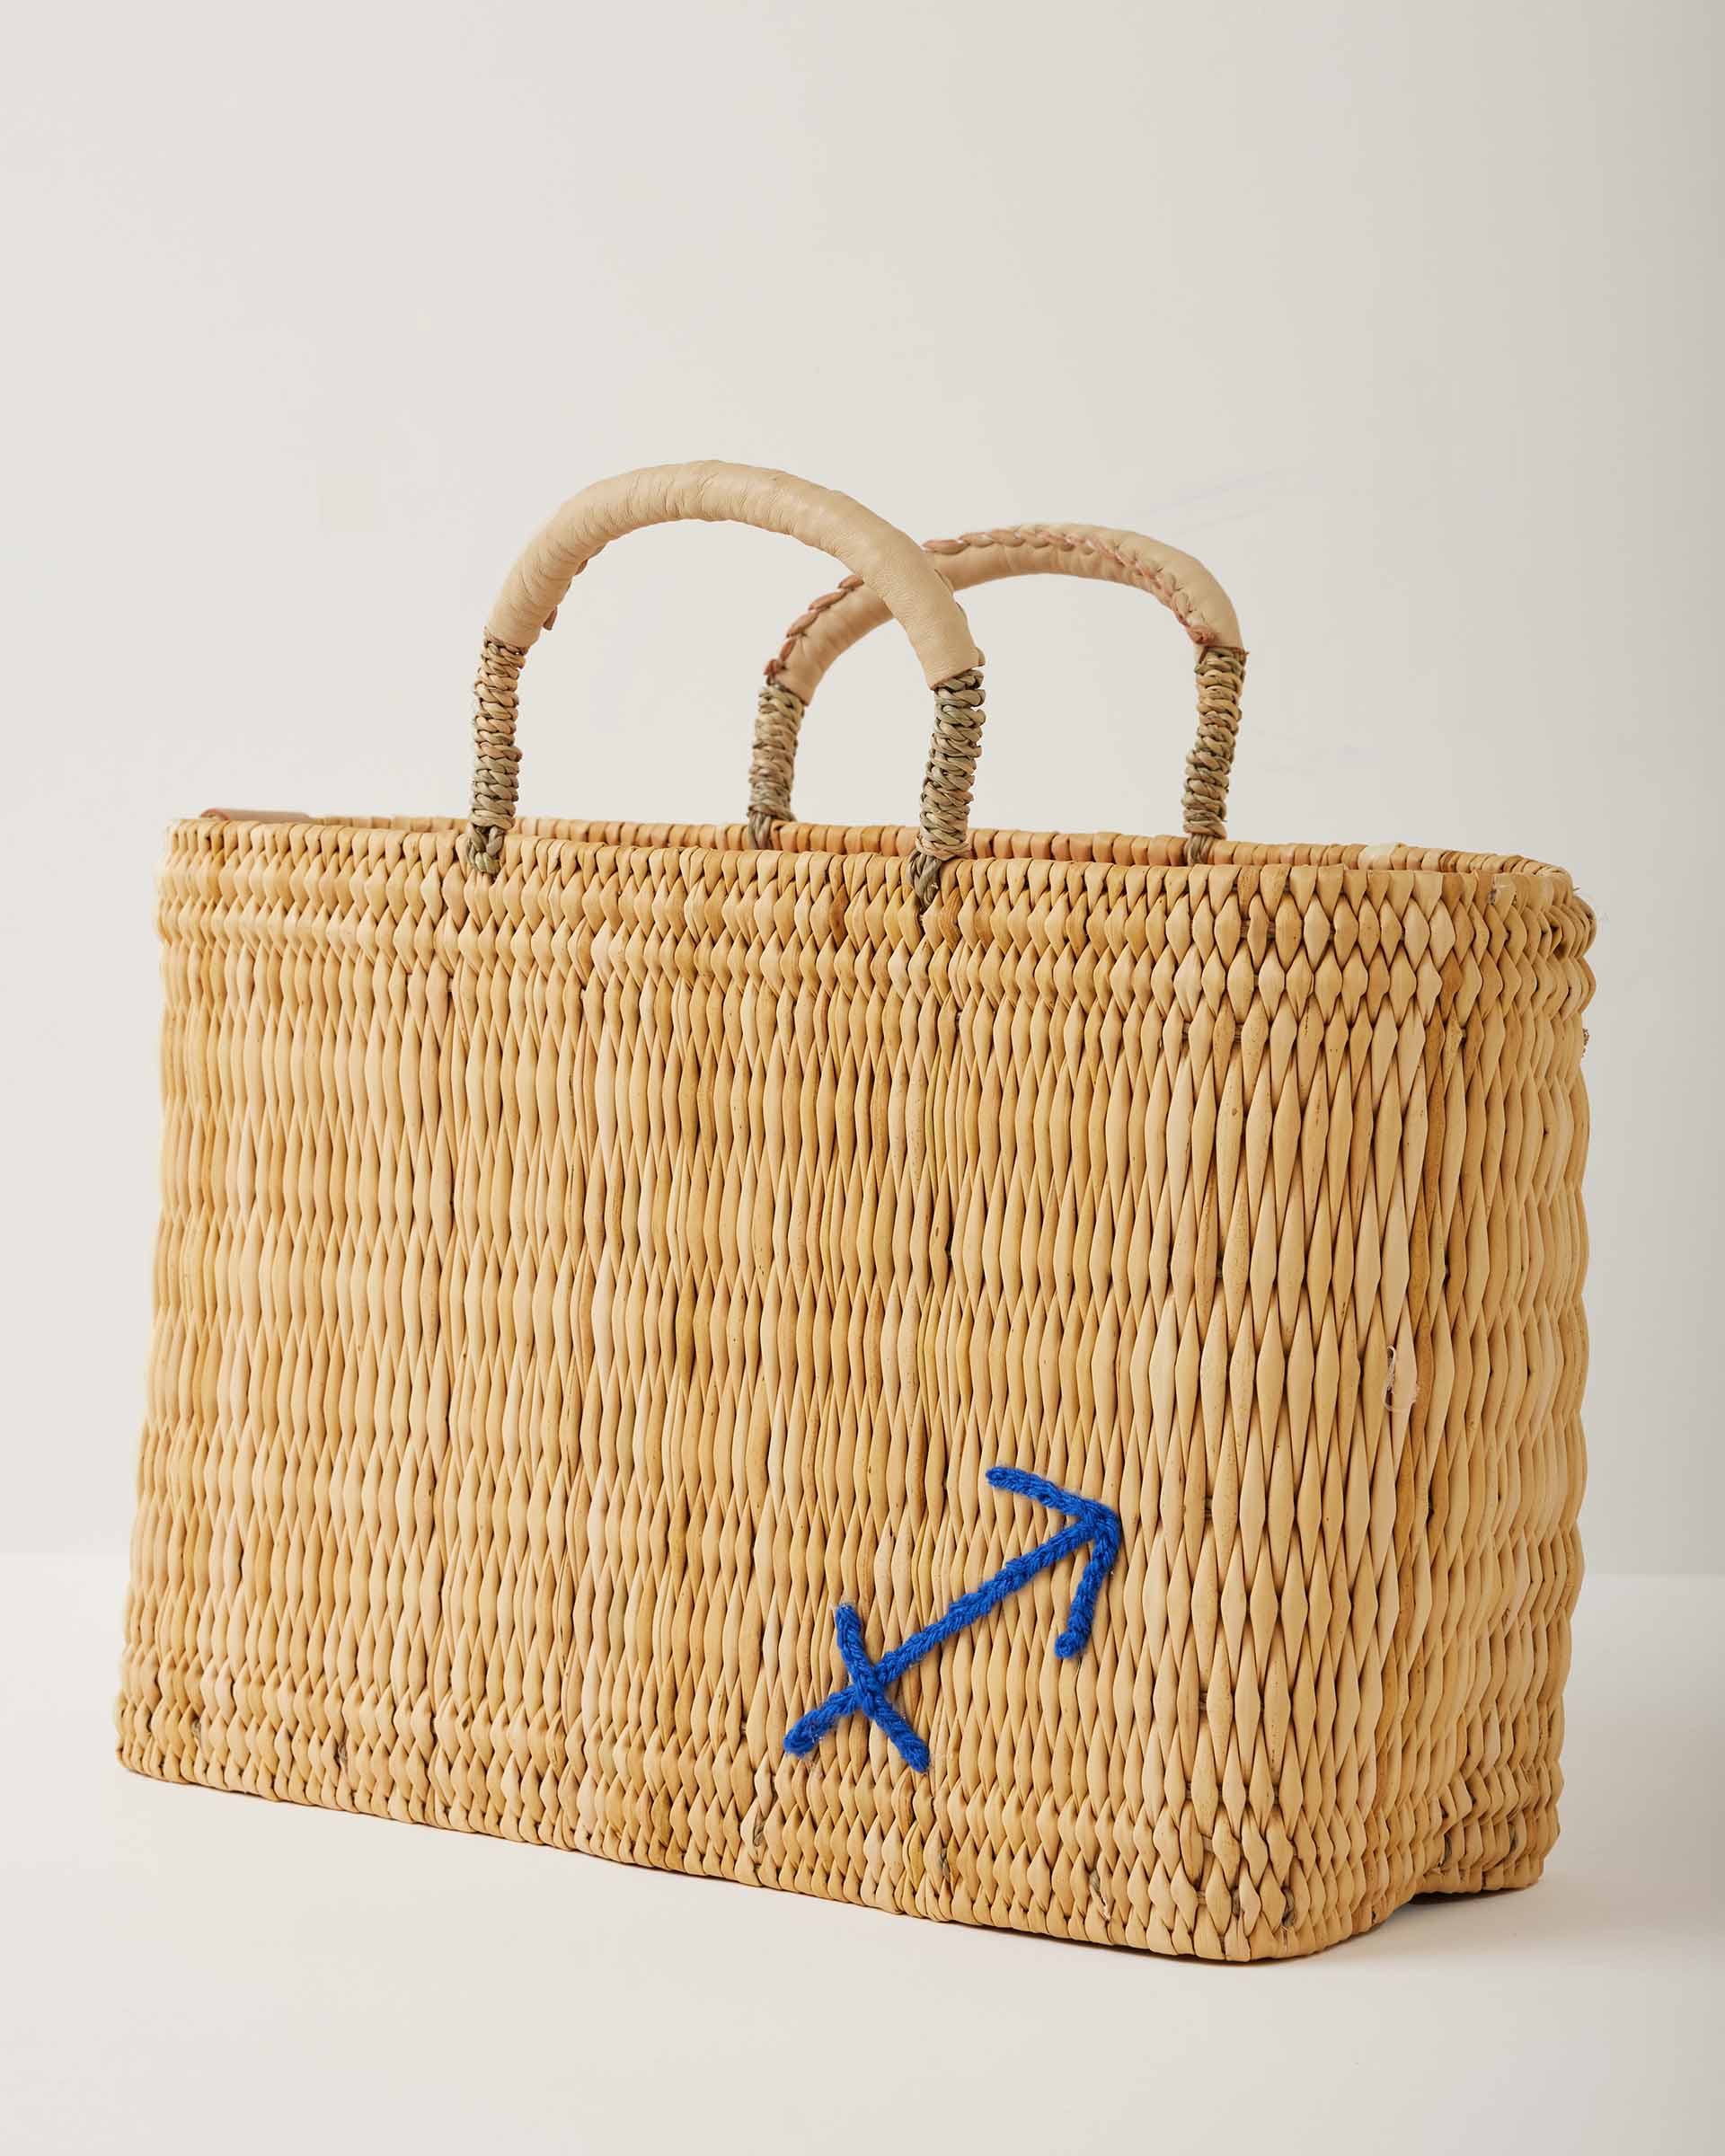 Market straw basket with tan leather handles and Sagittarius symbol embroidered in blue